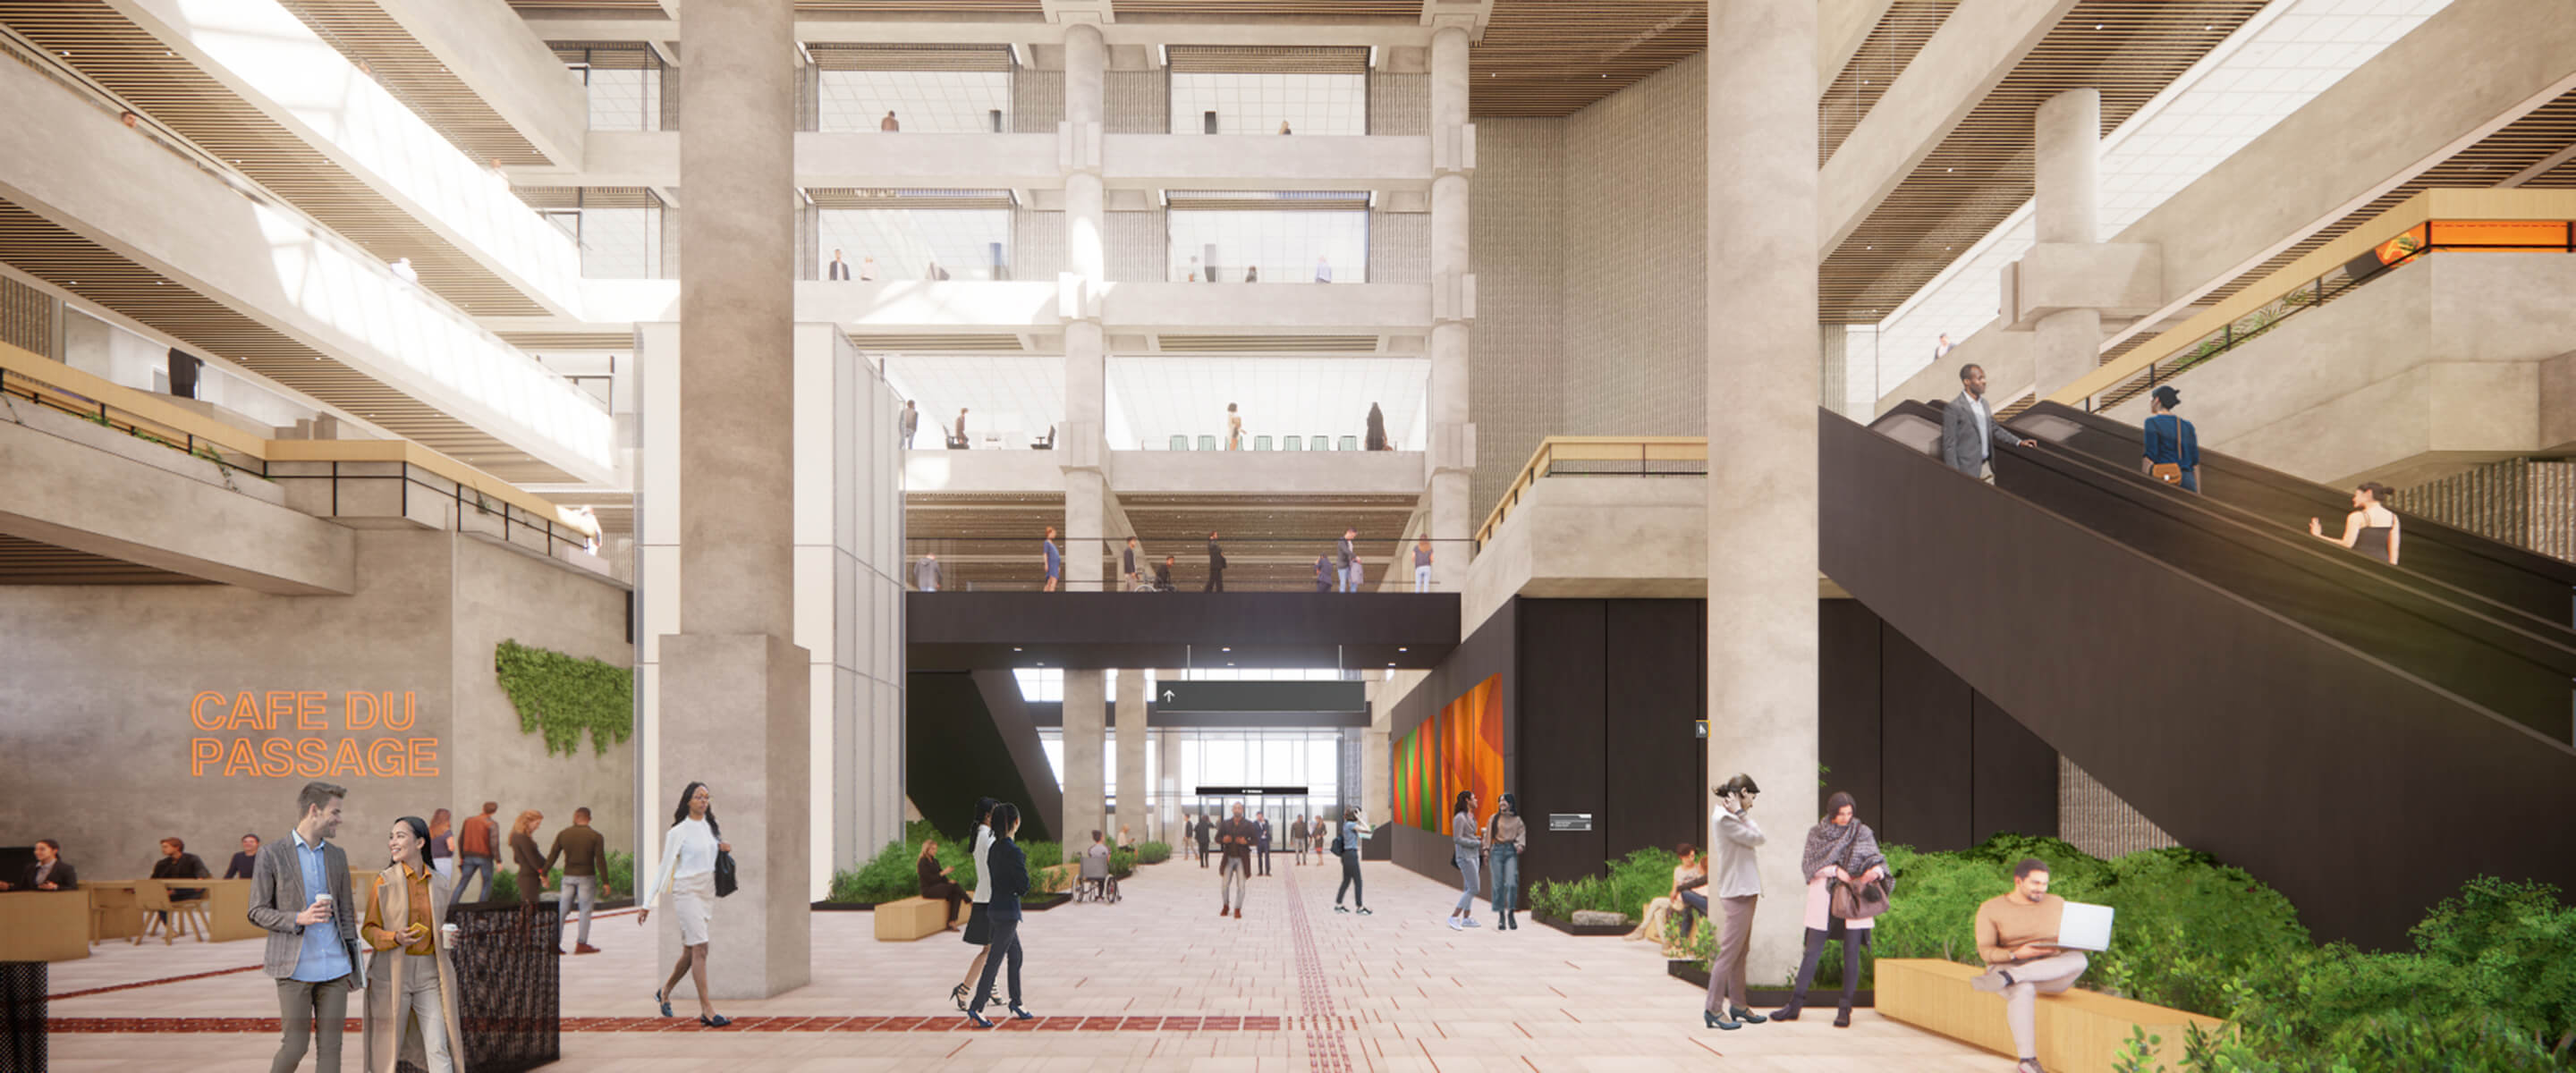 Place du Portage Phase III Asset and Workplace Renewal — Atrium